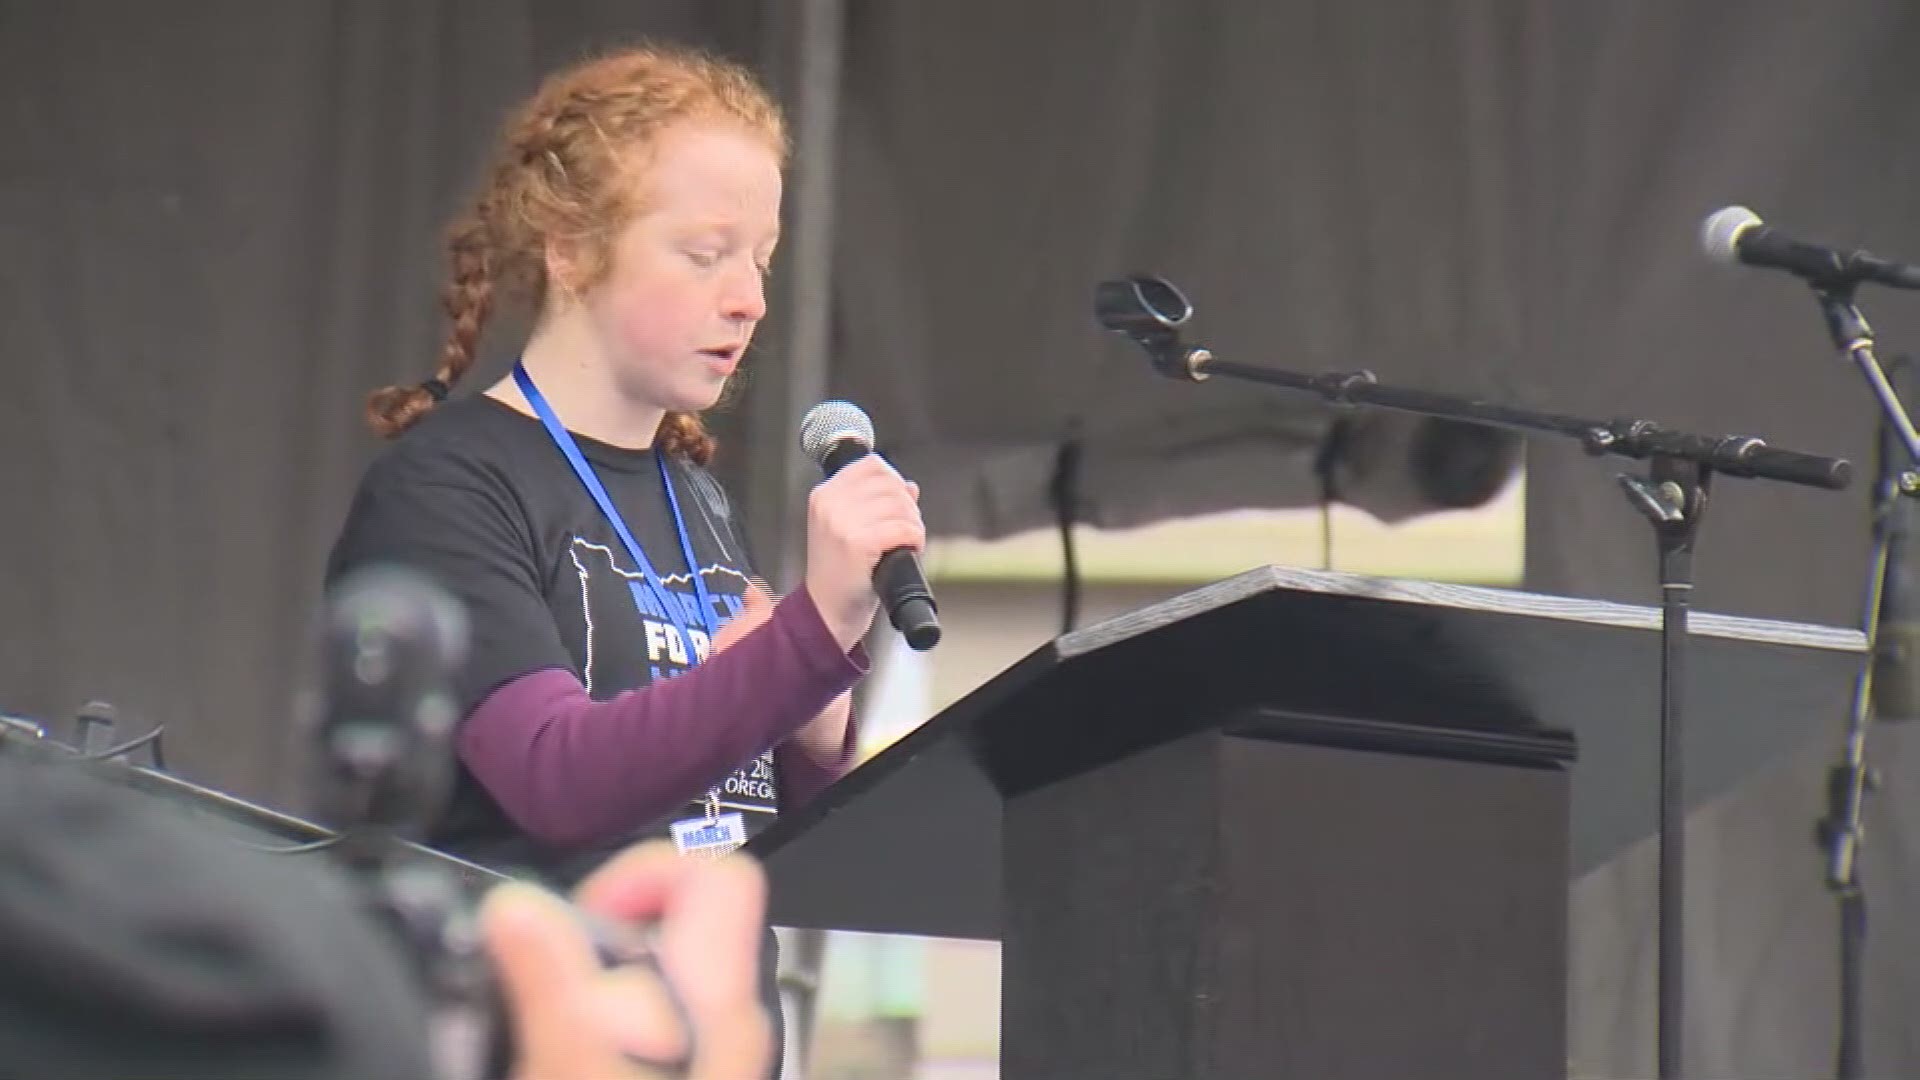 Student organizer Ellie Younger describes nightmares she has of gun violence impacting her life during her speech at Portland's March for Our Lives.